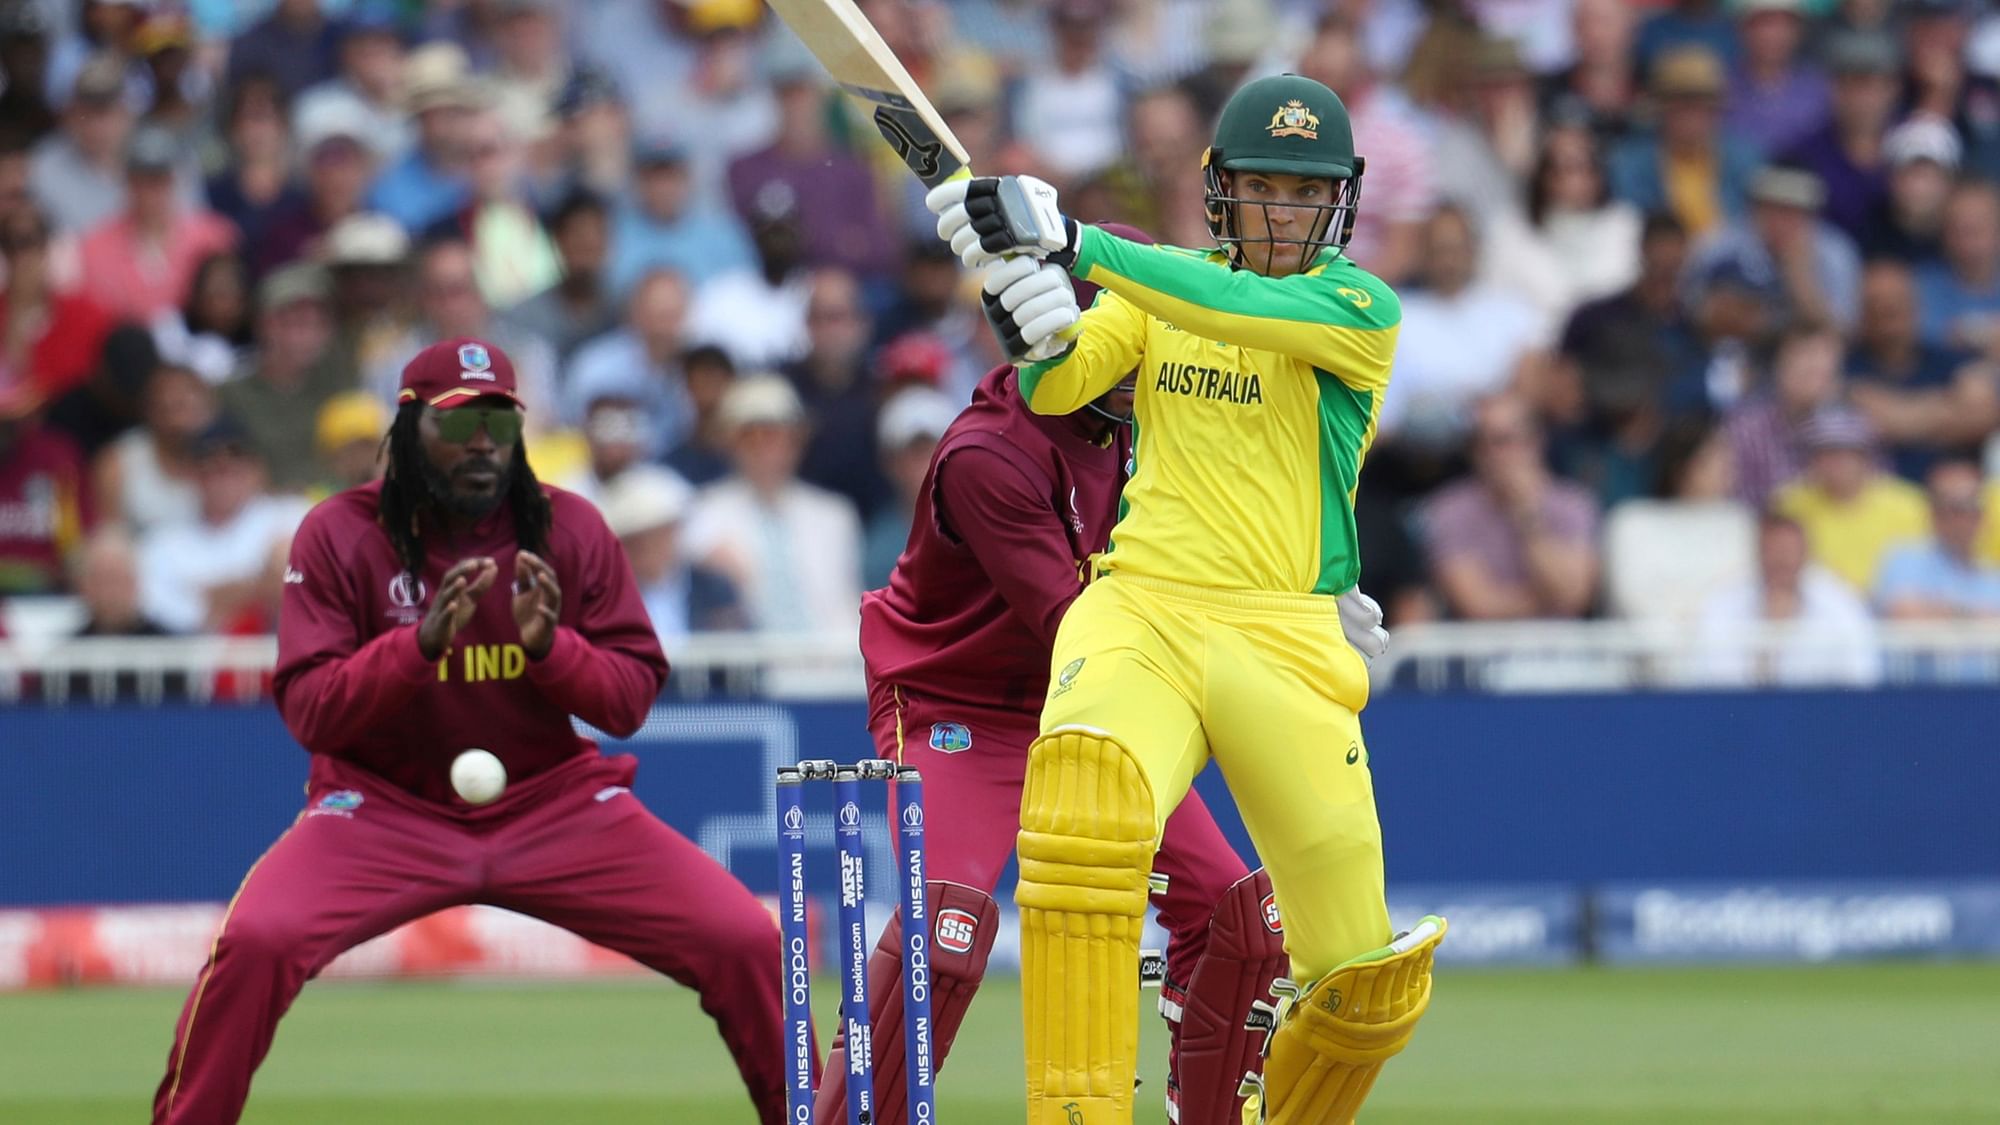 Australia’s Alex Carey plays a shot during the Cricket World Cup match between Australia and West Indies at Trent Bridge in Nottingham, Thursday, June 6, 2019.&nbsp;